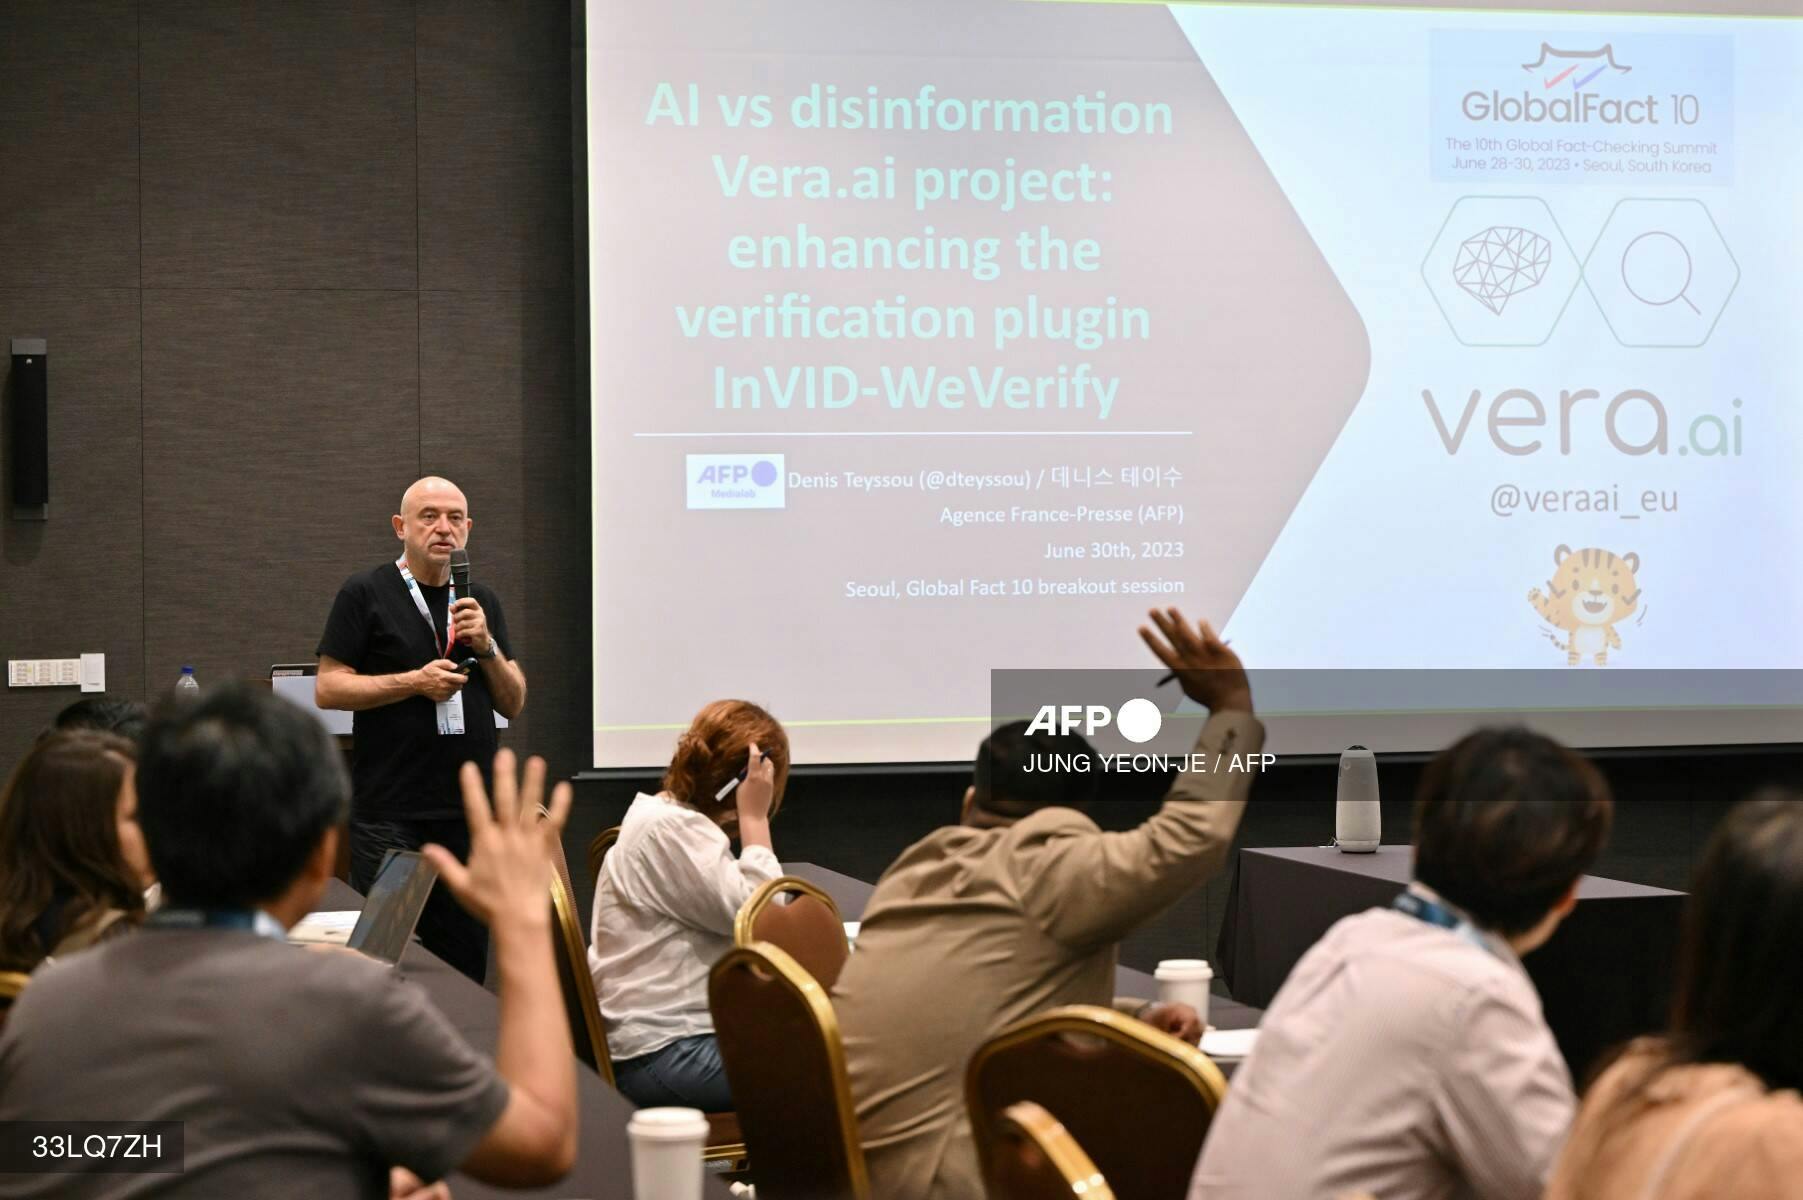 Denis Teyssou presenting the vera.ai project at Global Fact 10 in Seoul, on June 30.